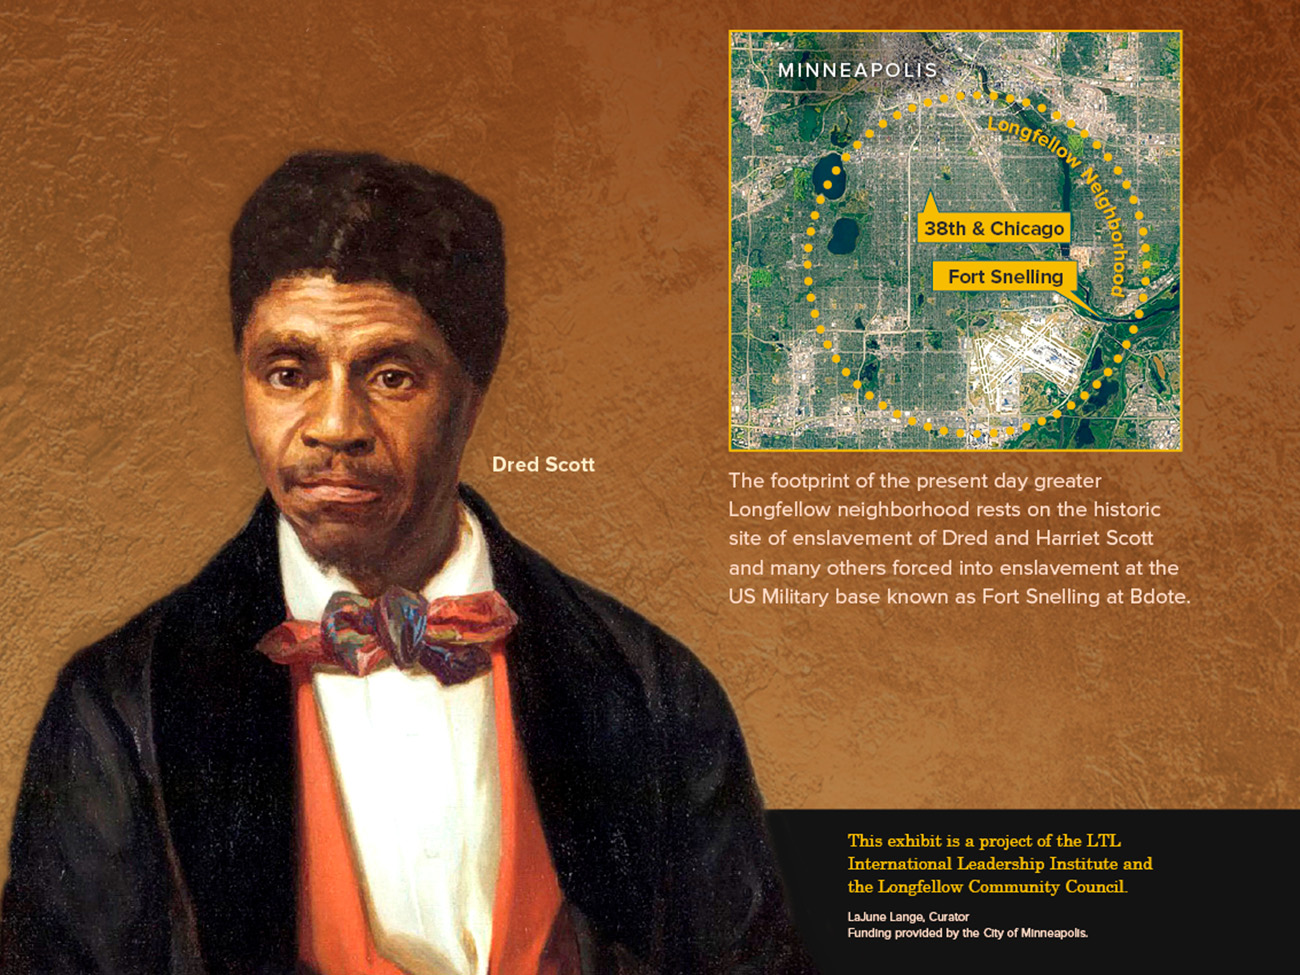 An image of Dred Scott against a brown background, with an inset amp of Minneapolis highlighting the Greater Longfellow Neighborhood